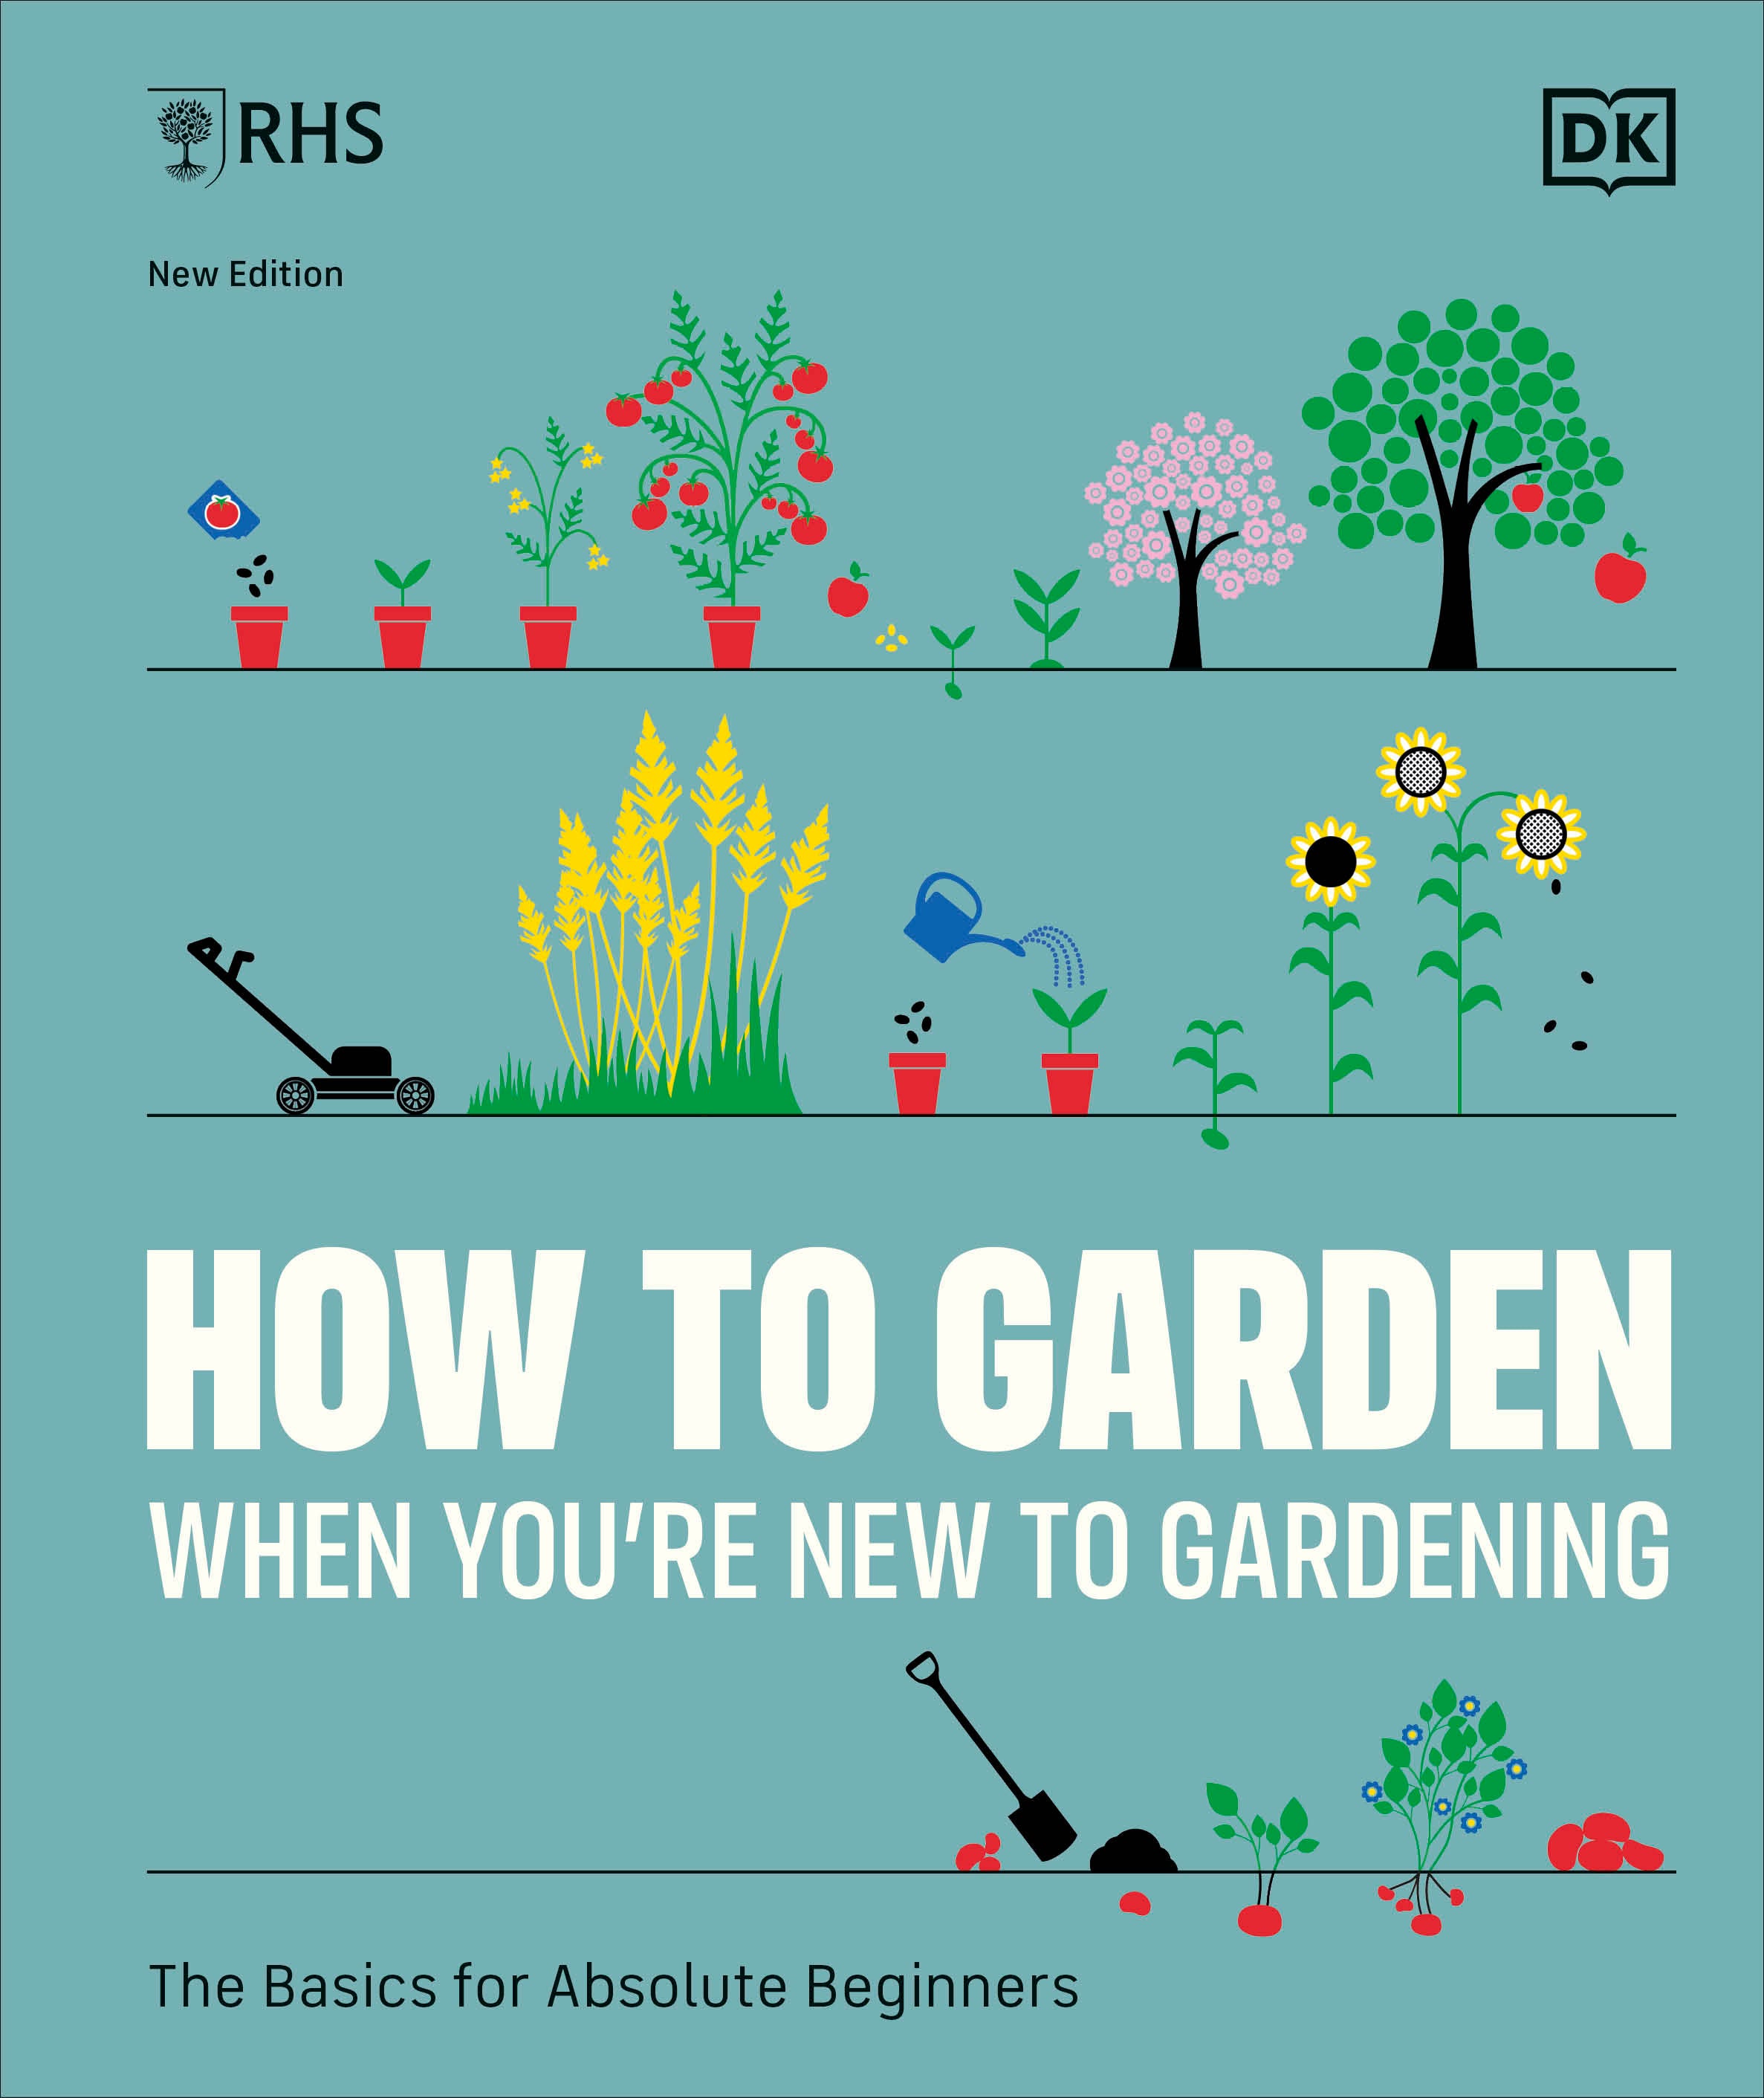 How To Garden When You're New To Gardening (RHS)| Book - Lifestory